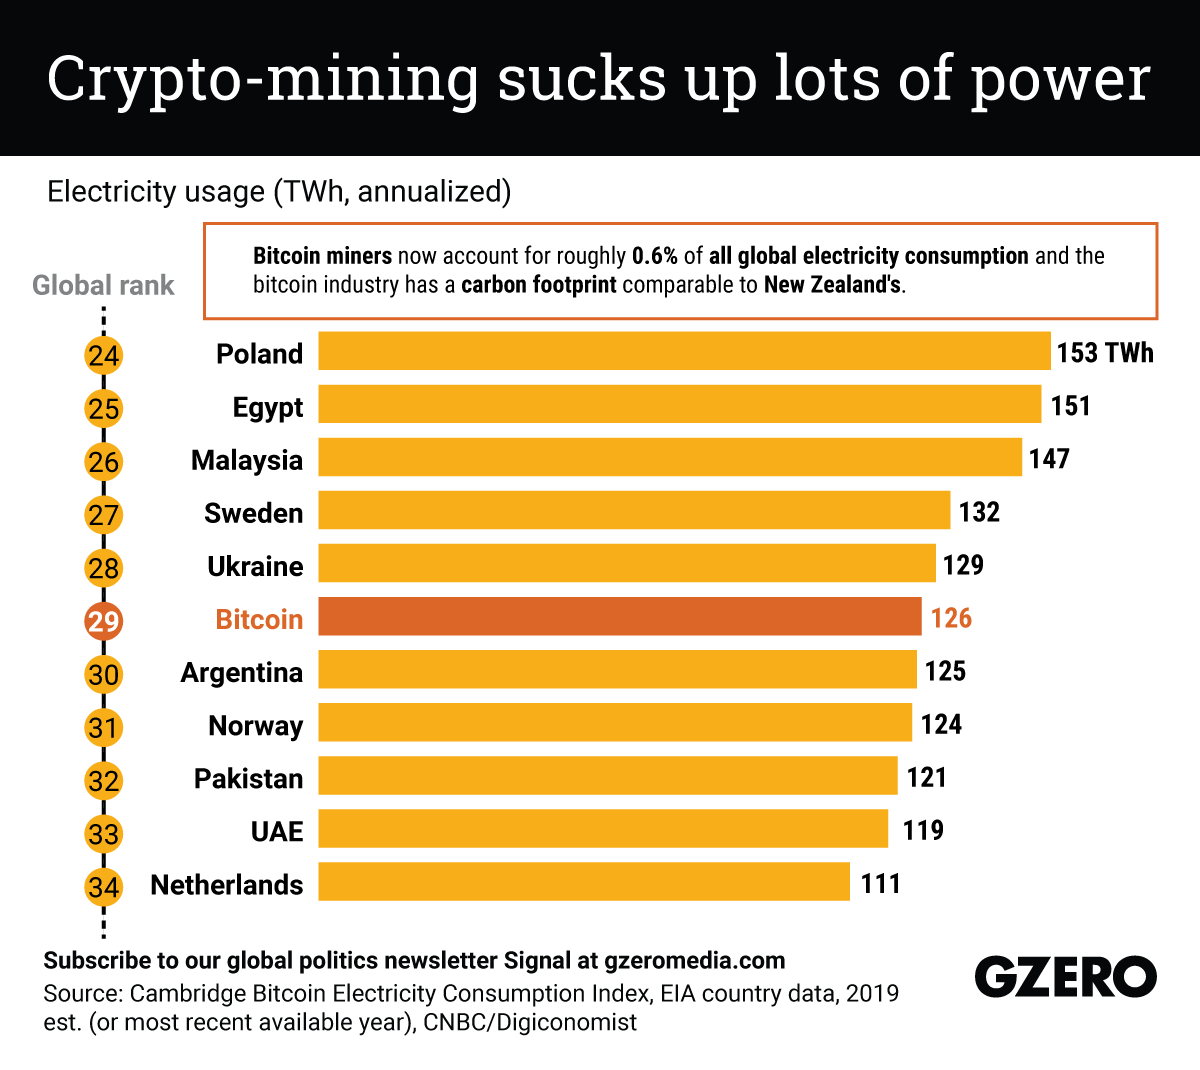 Crypto miners in Kazakhstan face bitter winter of power cuts   Financial  Times